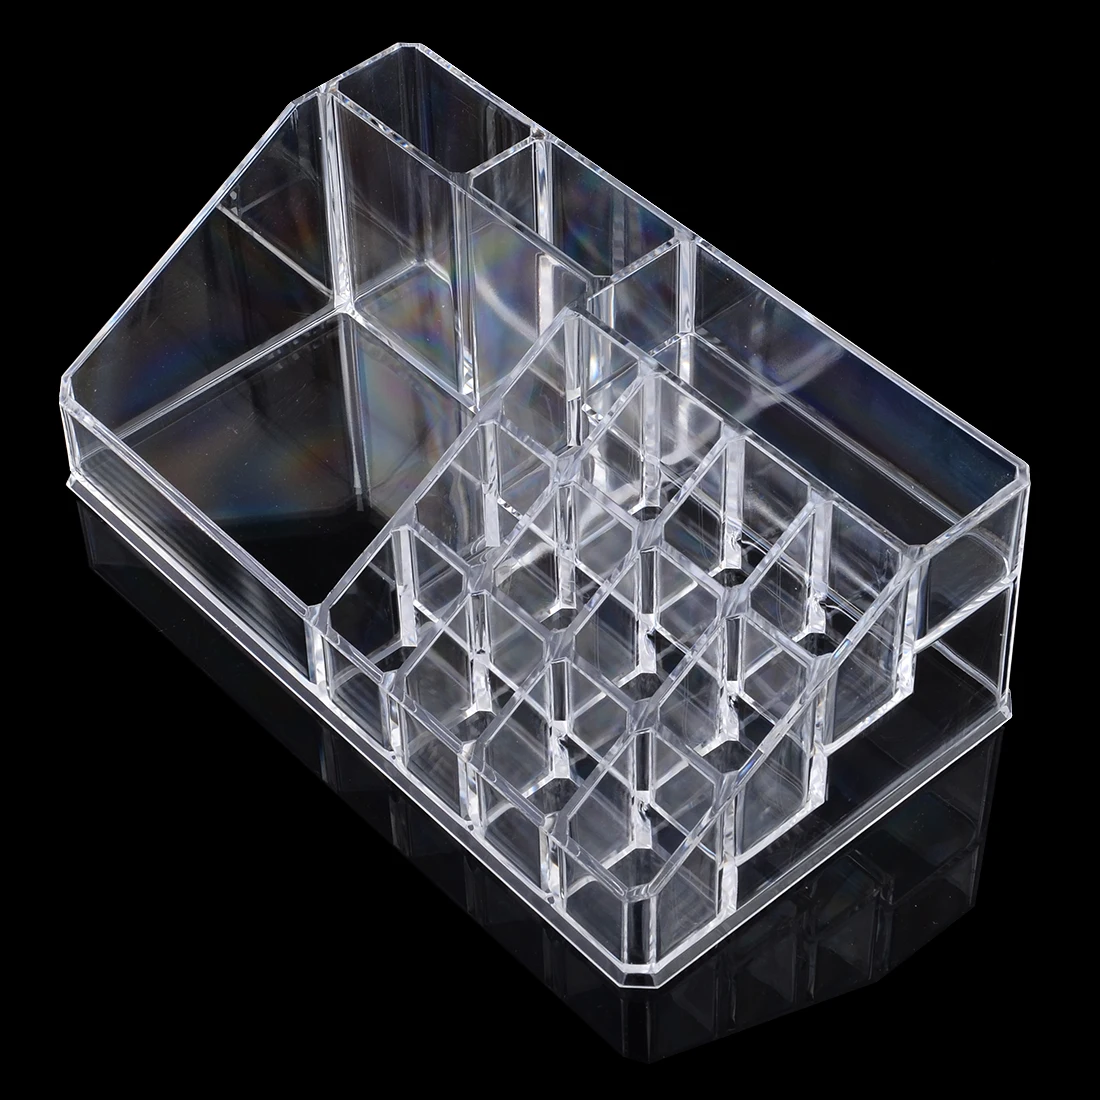 High Quality Applied Cosmetics Organizer Clear Acrylic Make Up Storage Jewelry Case Lipstick Liner Brush Holder Box